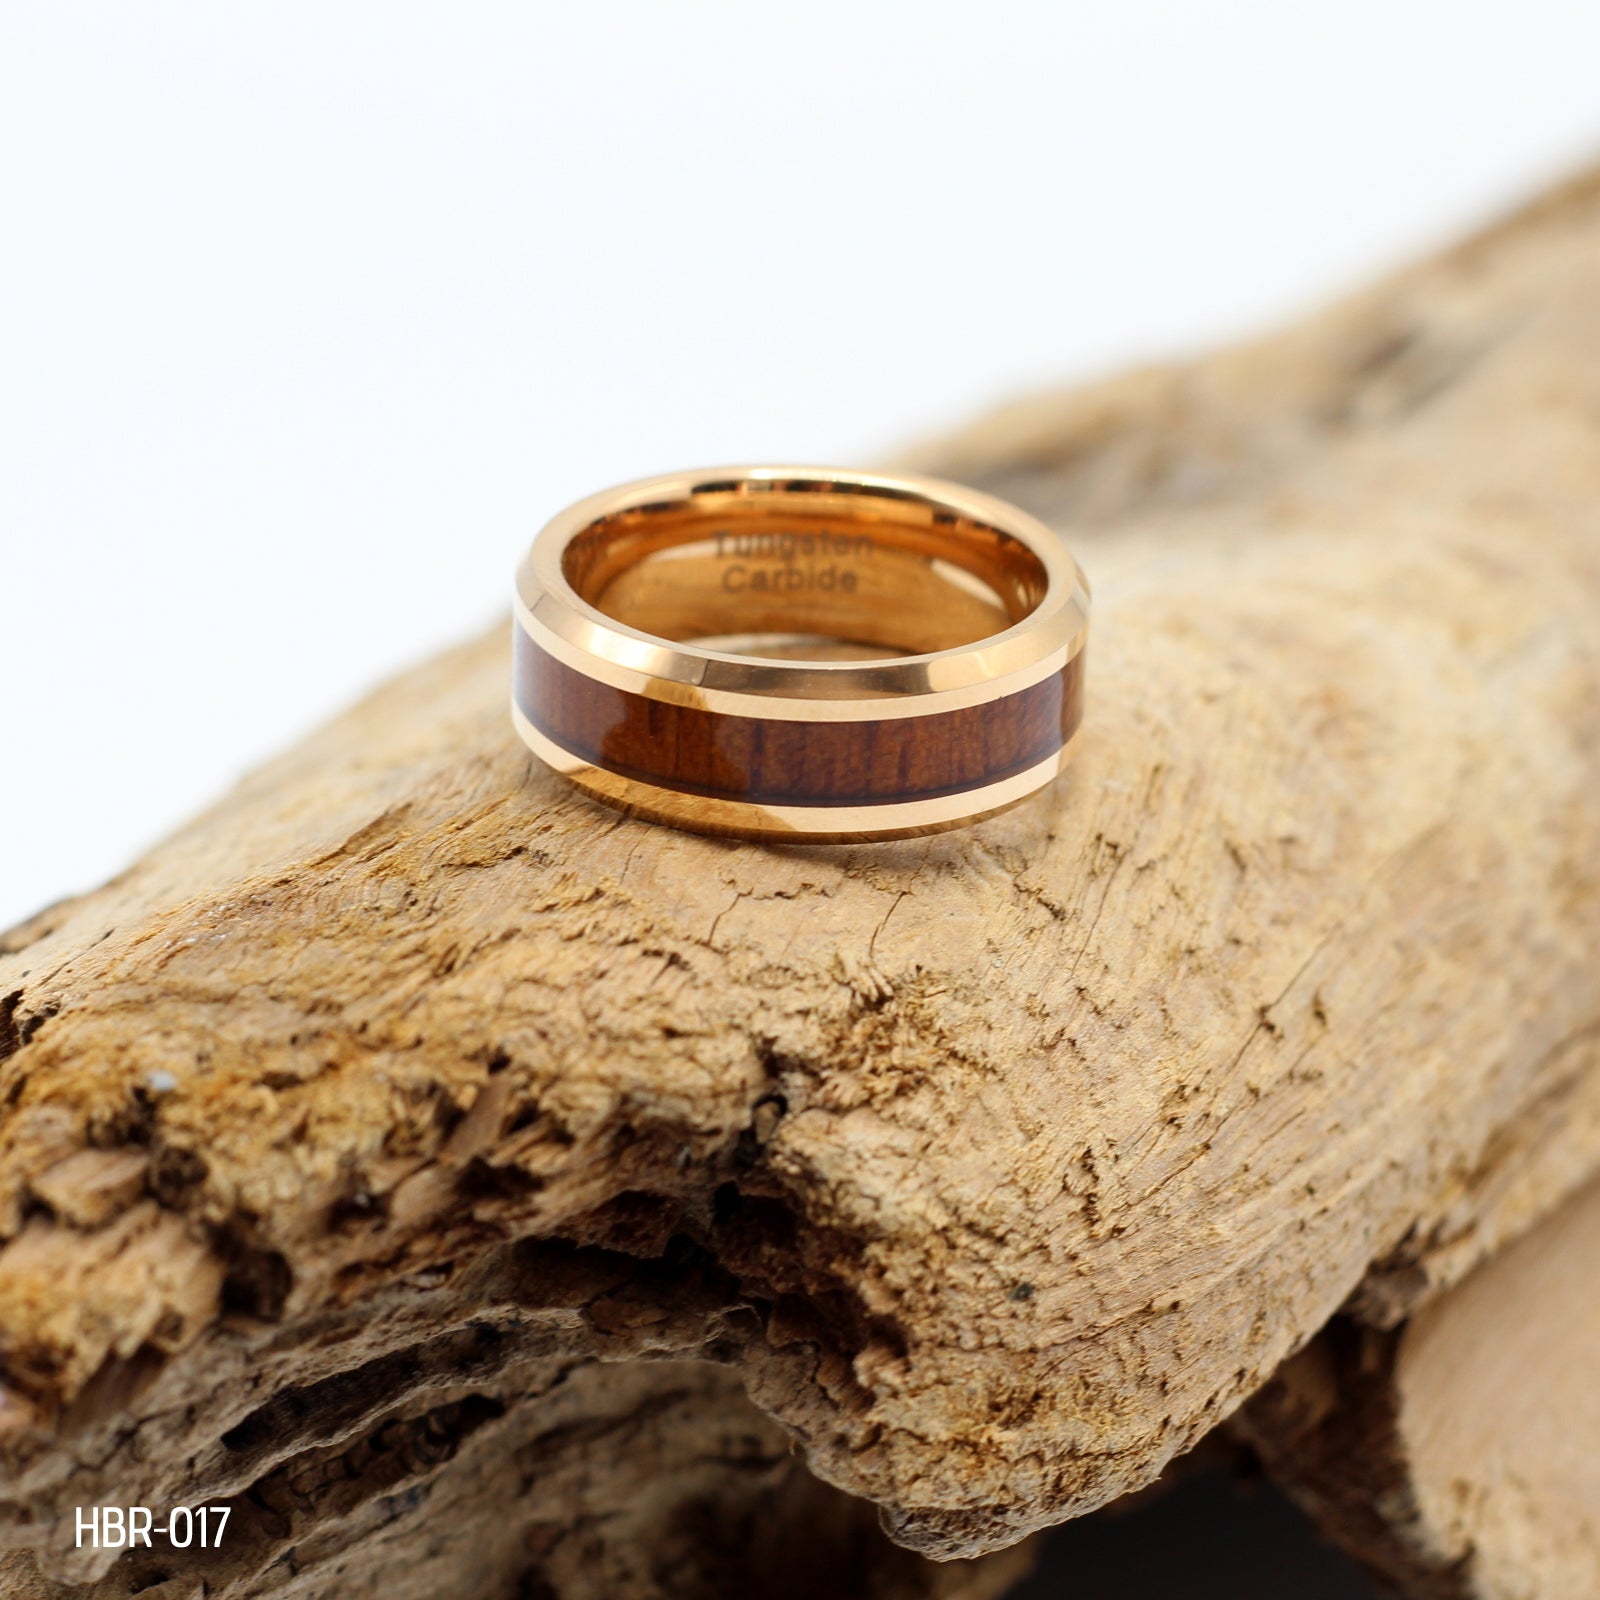 Men's Rose Gold Tungsten Ring with Koa Wood Inlay - Hashtag Bamboo. Personalise your ring, fast delivery.